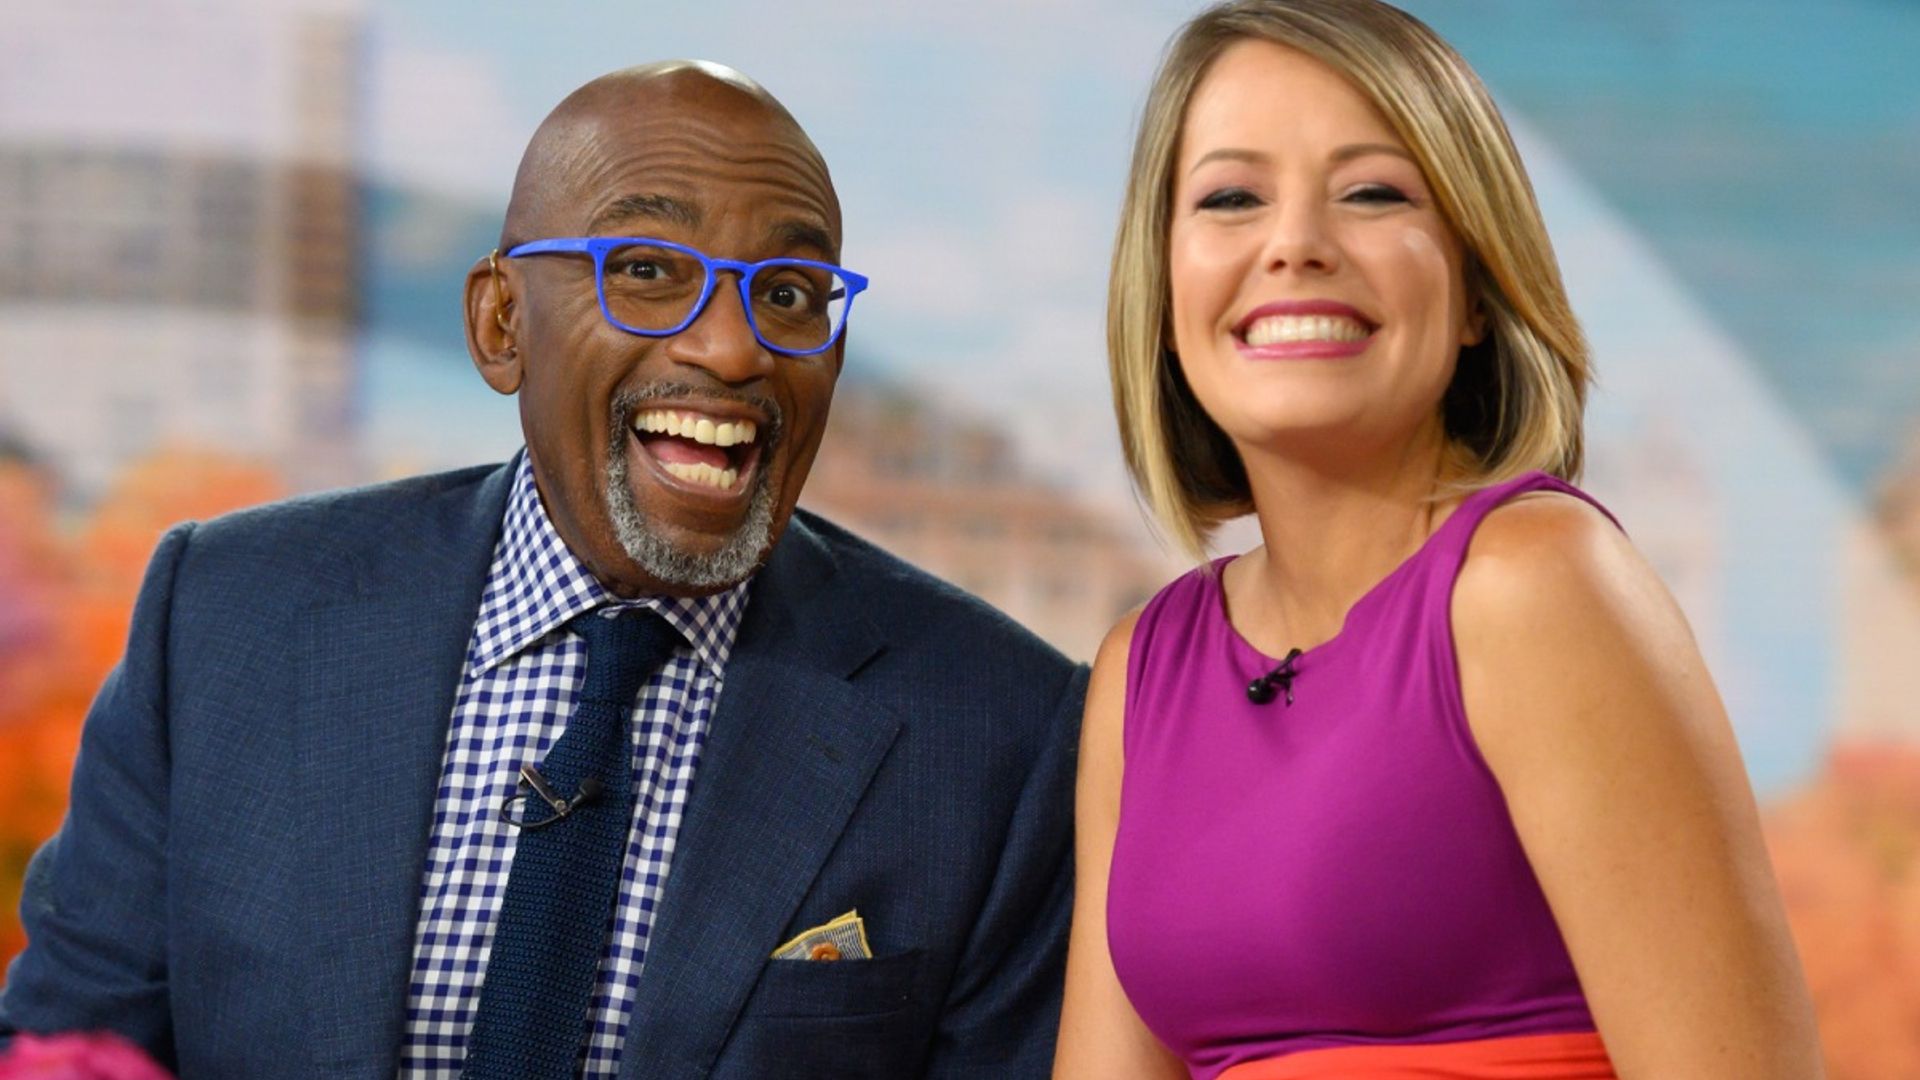 Today’s Dylan Dreyer brings fans to tears with an emotional update on Al Roker